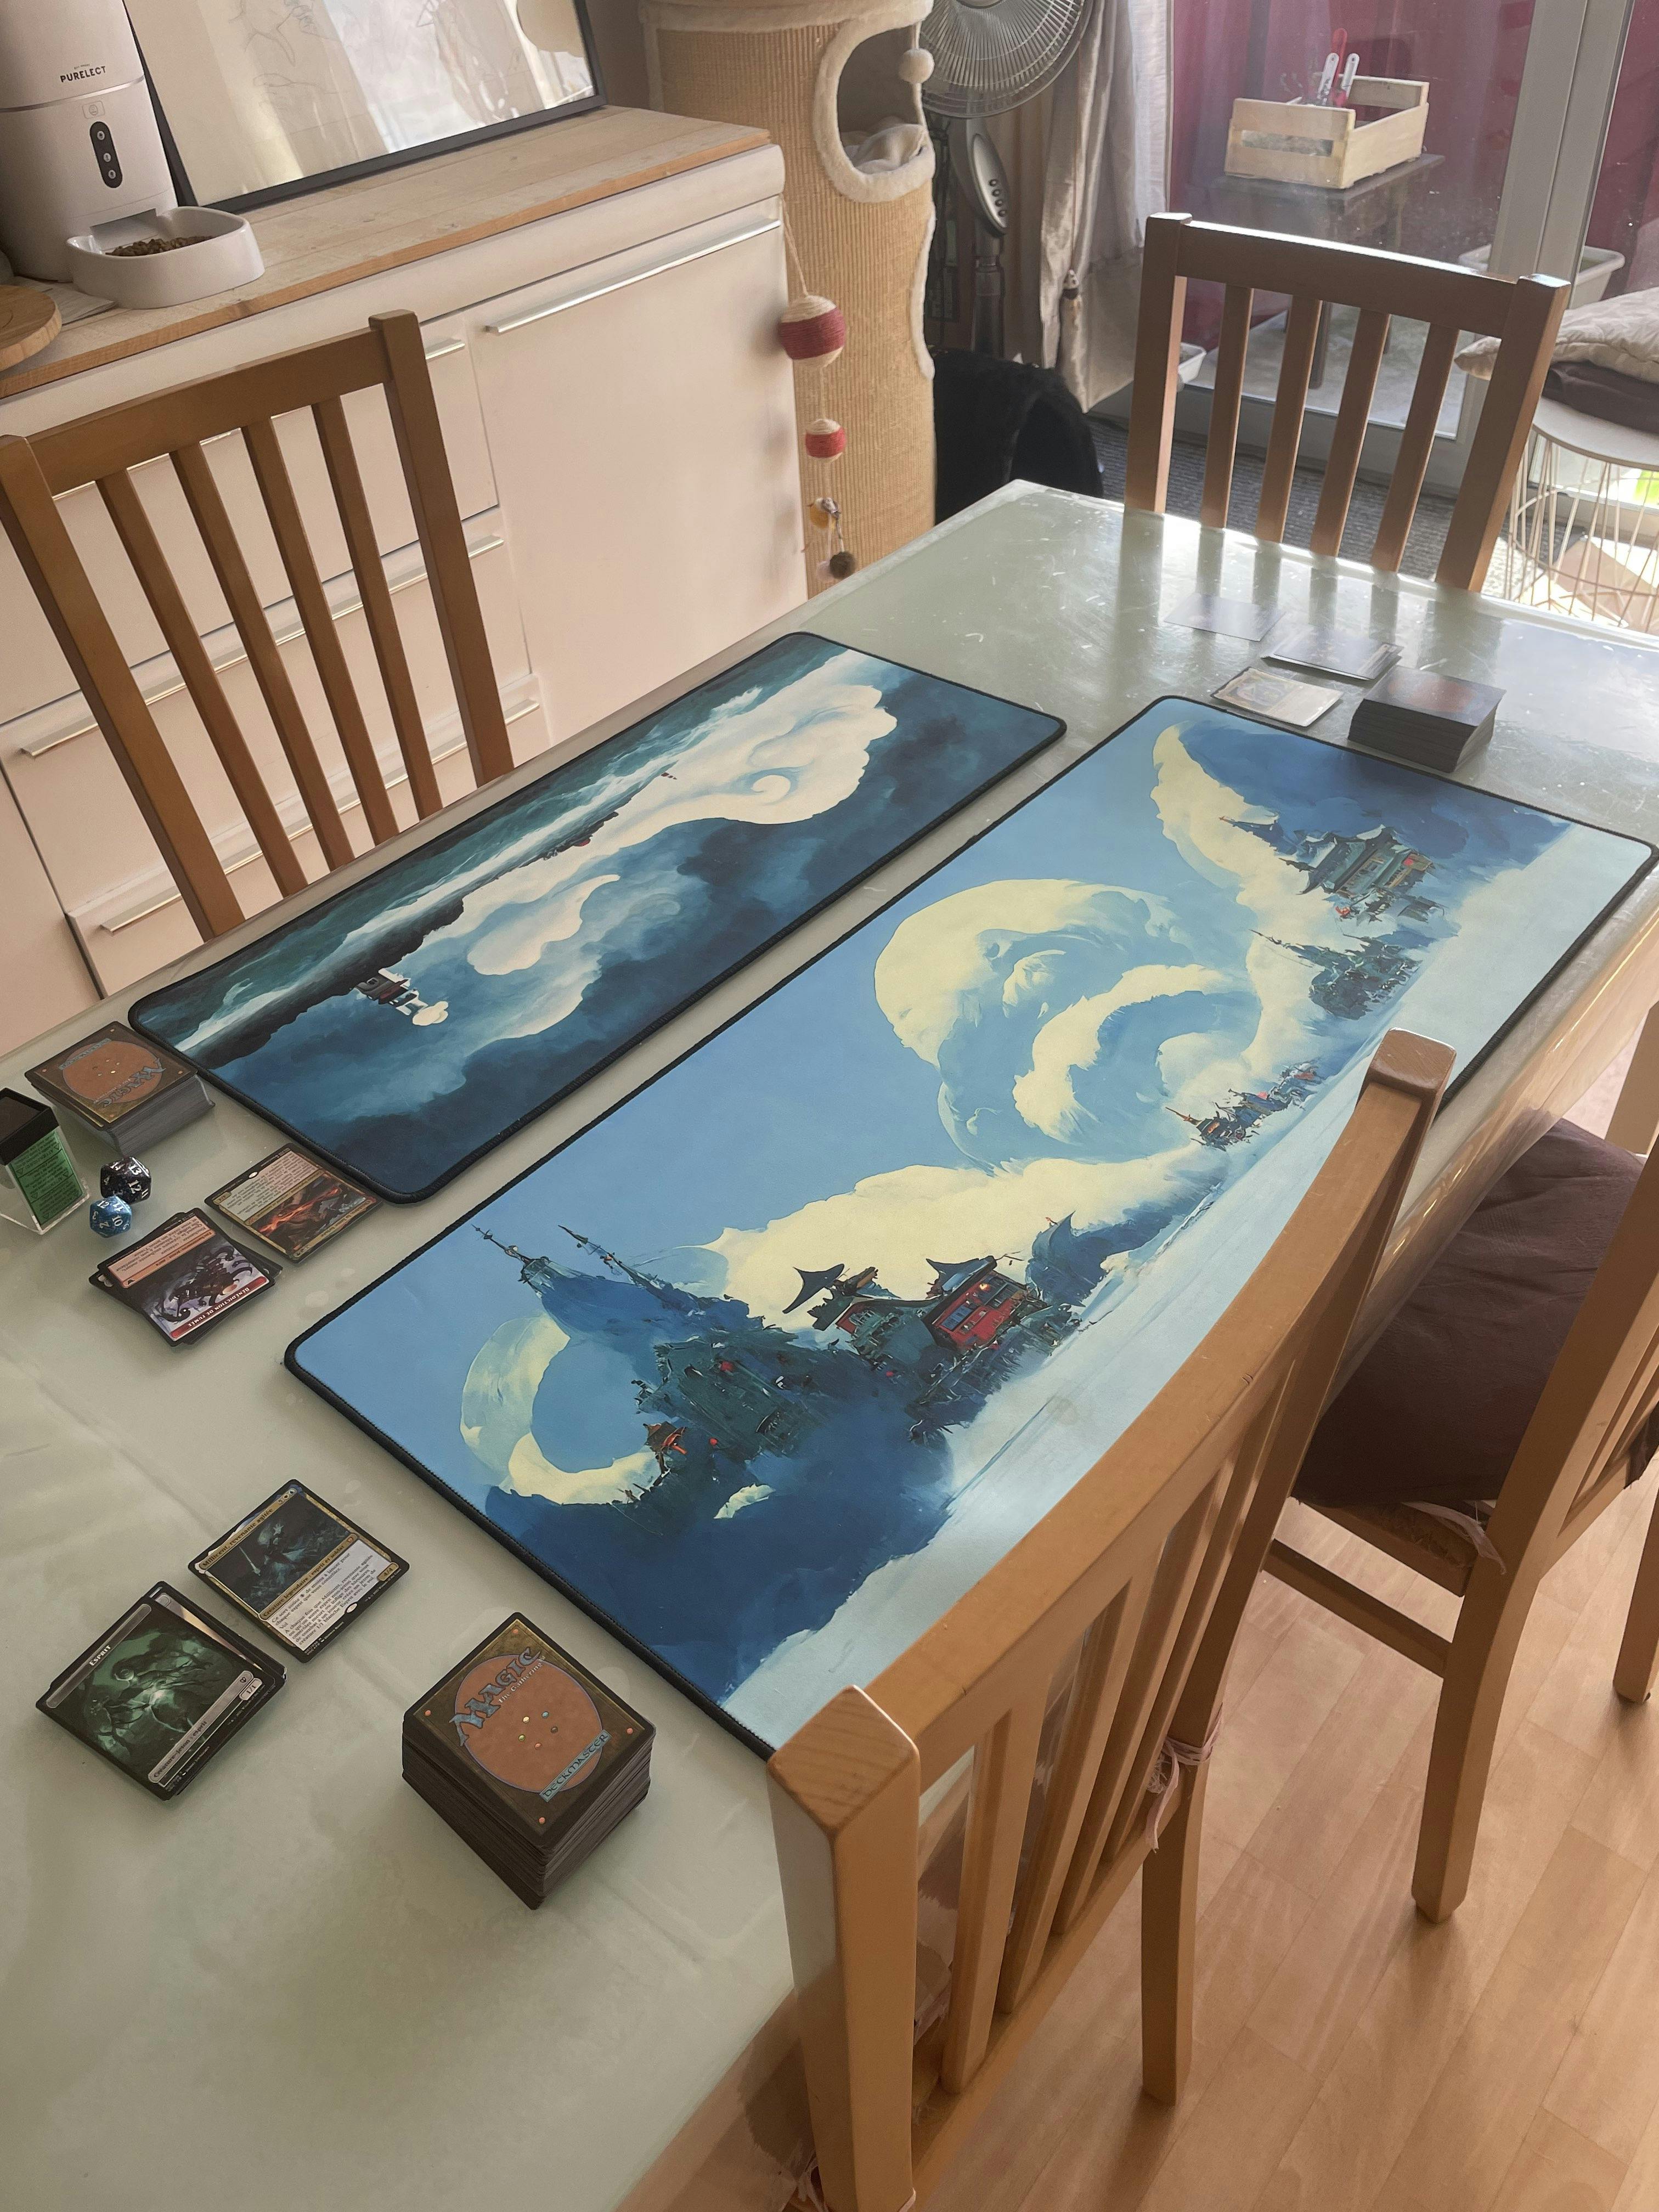 Review photo of deskmat by Silfur